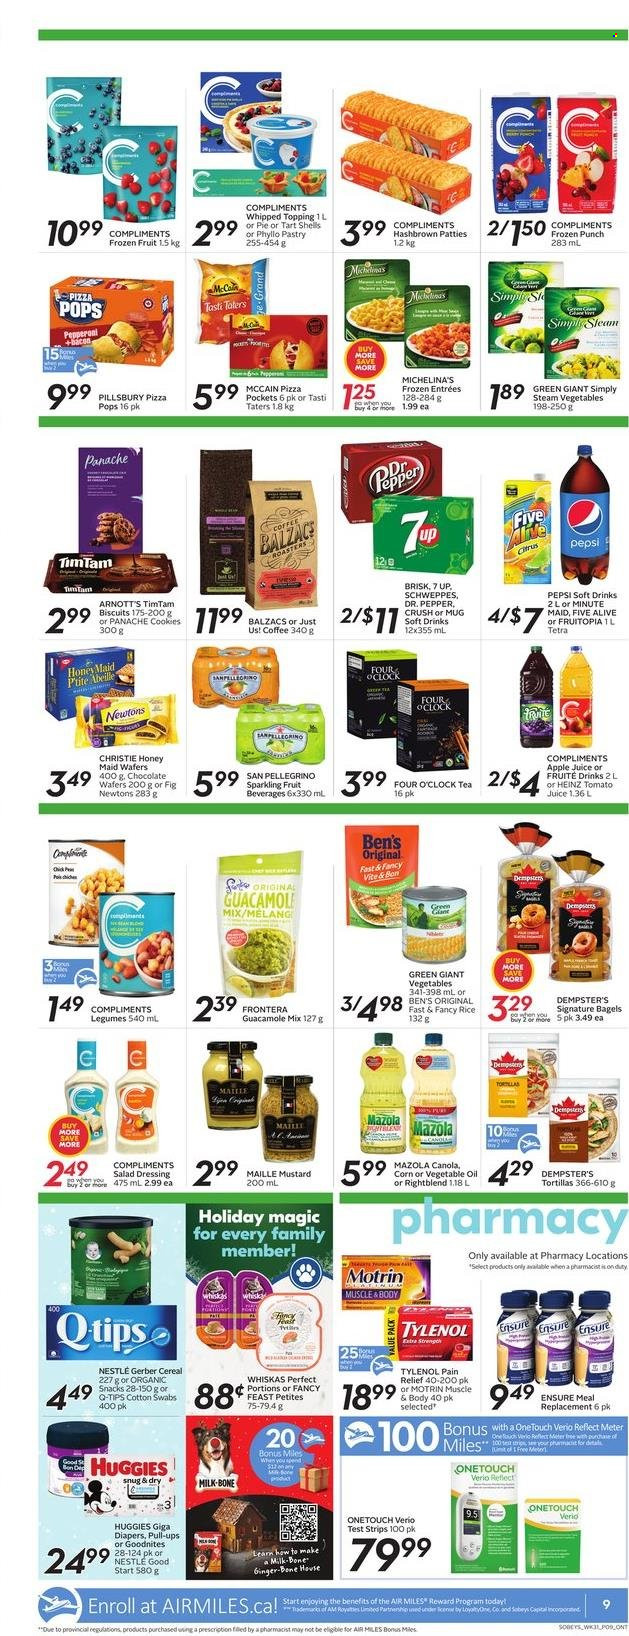 thumbnail - Sobeys Flyer - November 25, 2021 - December 01, 2021 - Sales products - bagels, pie, corn, pizza, Pillsbury, pepperoni, guacamole, milk, McCain, cookies, wafers, chocolate wafer, chocolate, snack, biscuit, Gerber, topping, Heinz, cereals, Honey Maid, rice, pepper, mustard, salad dressing, dressing, apple juice, Schweppes, tomato juice, Pepsi, juice, Dr. Pepper, soft drink, 7UP, fruit punch, San Pellegrino, tea, coffee, nappies, Fancy Feast, pain relief, Tylenol, Motrin, Nestlé, Huggies, Whiskas. Page 10.